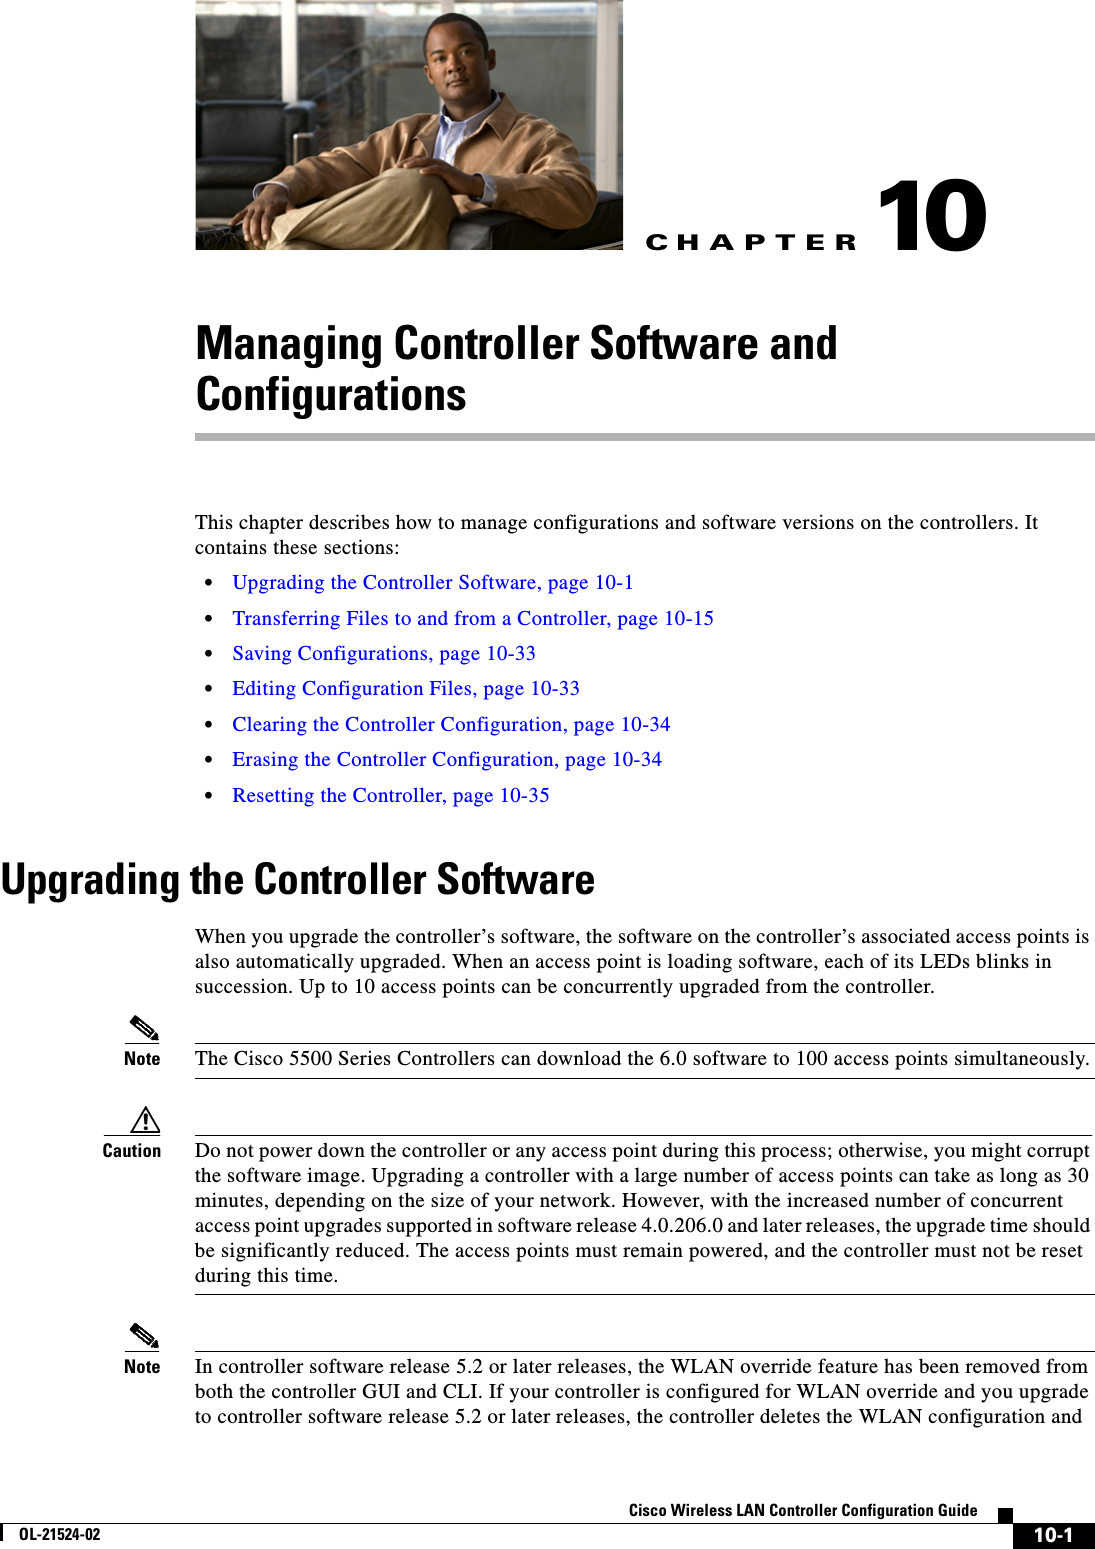 CHAPTER10-1Cisco Wireless LAN Controller Configuration GuideOL-21524-0210Managing Controller Software and ConfigurationsThis chapter describes how to manage configurations and software versions on the controllers. It contains these sections:  • Upgrading the Controller Software, page 10-1  • Transferring Files to and from a Controller, page 10-15  • Saving Configurations, page 10-33  • Editing Configuration Files, page 10-33  • Clearing the Controller Configuration, page 10-34  • Erasing the Controller Configuration, page 10-34  • Resetting the Controller, page 10-35Upgrading the Controller SoftwareWhen you upgrade the controller’s software, the software on the controller’s associated access points is also automatically upgraded. When an access point is loading software, each of its LEDs blinks in succession. Up to 10 access points can be concurrently upgraded from the controller.Note The Cisco 5500 Series Controllers can download the 6.0 software to 100 access points simultaneously.Caution Do not power down the controller or any access point during this process; otherwise, you might corrupt the software image. Upgrading a controller with a large number of access points can take as long as 30 minutes, depending on the size of your network. However, with the increased number of concurrent access point upgrades supported in software release 4.0.206.0 and later releases, the upgrade time should be significantly reduced. The access points must remain powered, and the controller must not be reset during this time.Note In controller software release 5.2 or later releases, the WLAN override feature has been removed from both the controller GUI and CLI. If your controller is configured for WLAN override and you upgrade to controller software release 5.2 or later releases, the controller deletes the WLAN configuration and 